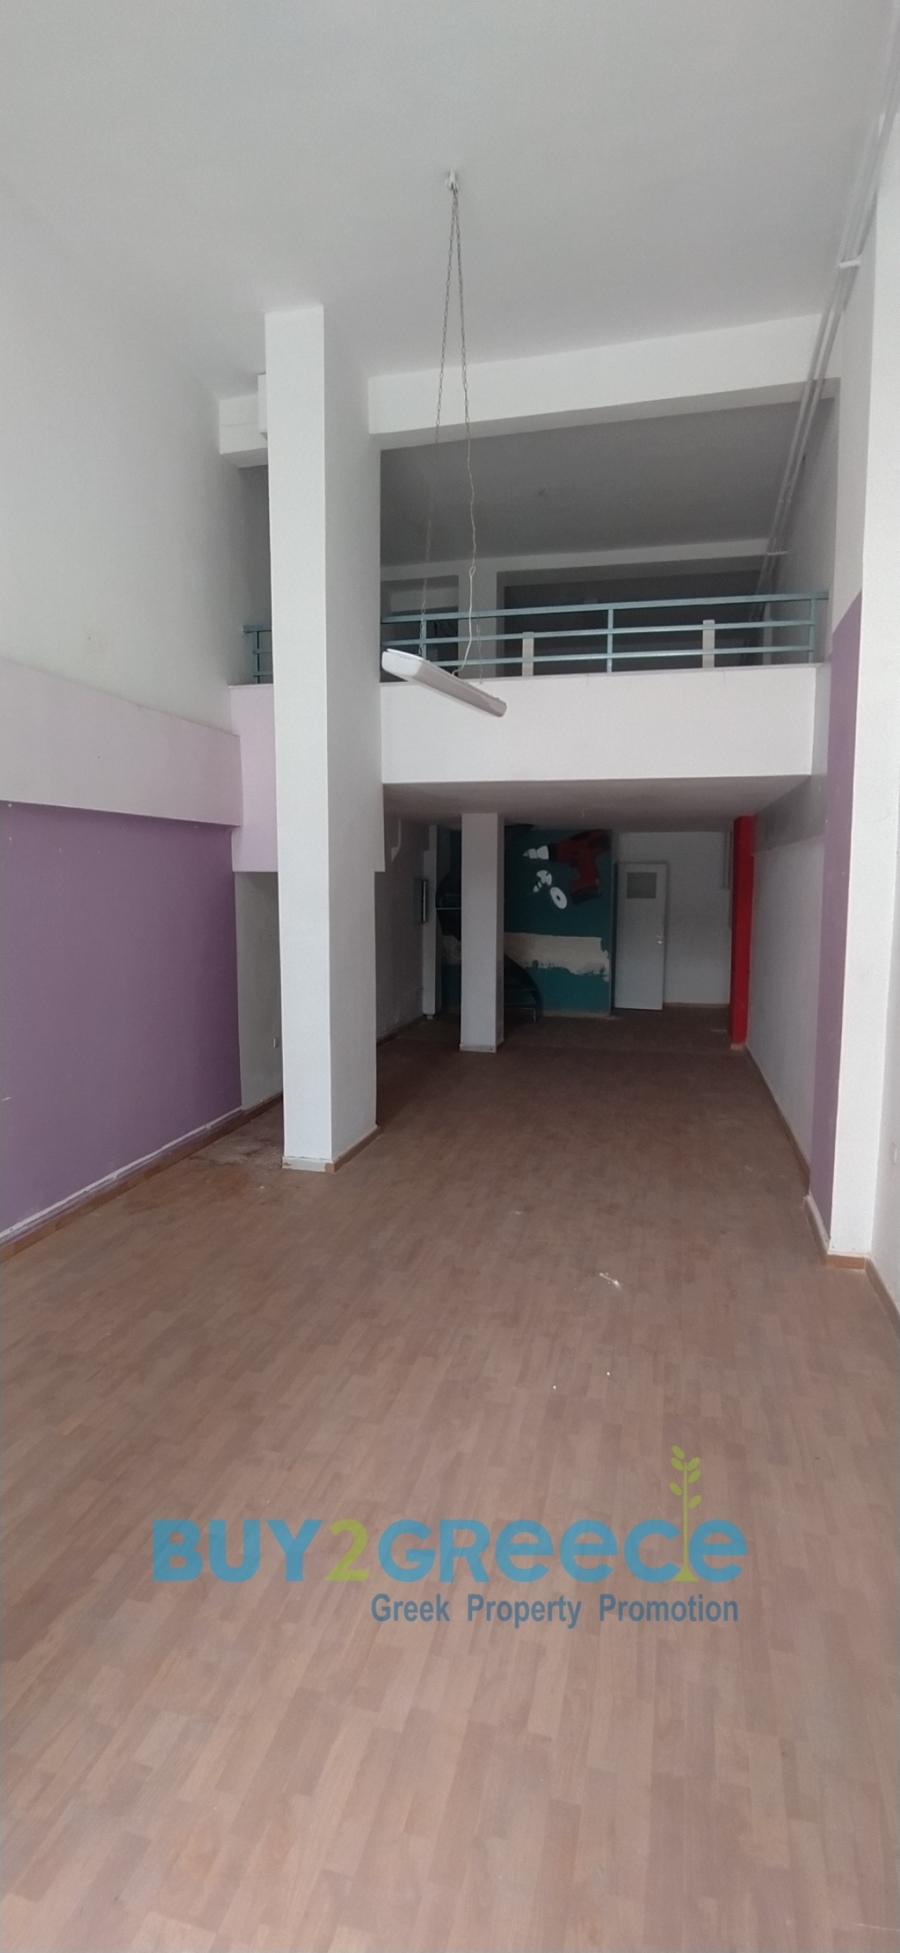 (For Rent) Commercial Retail Shop || Athens Center/Zografos - 60 Sq.m, 400€ ||| ID :1602253